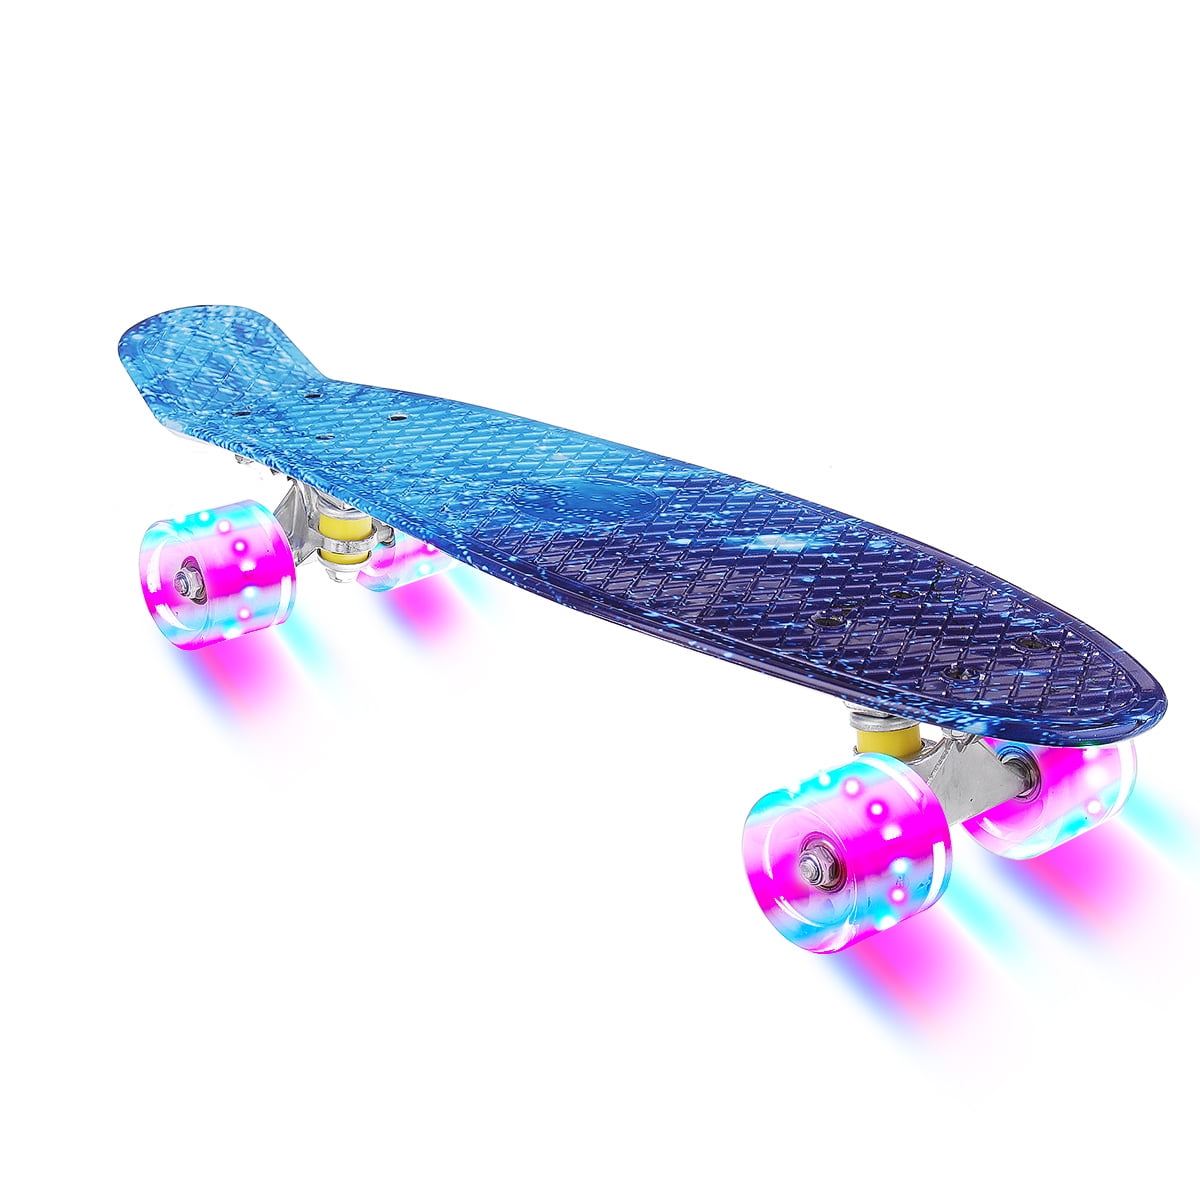 Details about   Skateboard Mini Cruiser Complete flashing Light 4 Wheel Board for Outdoor Sports 